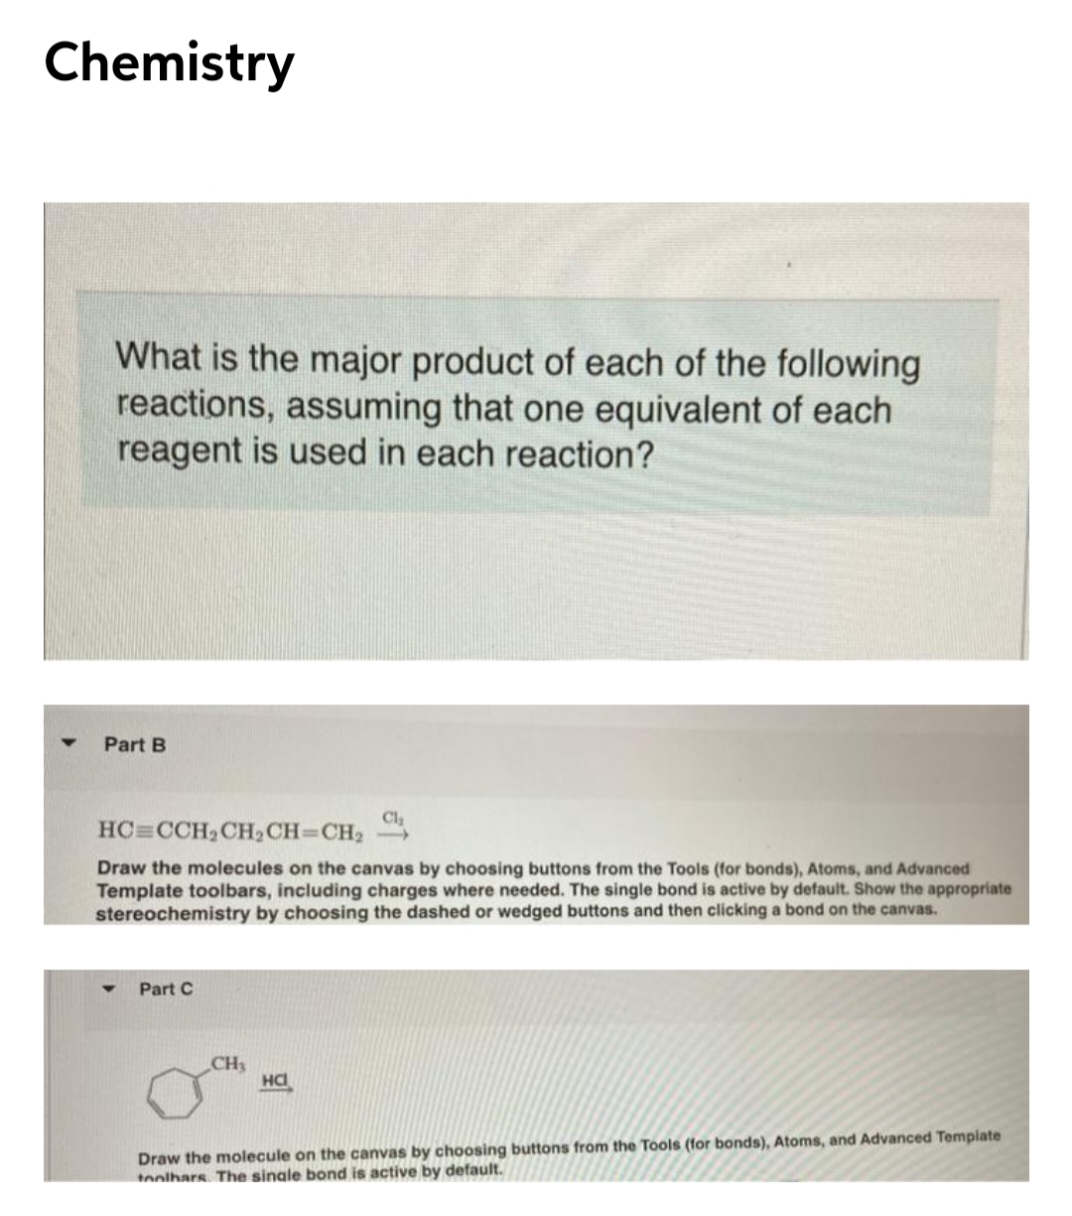 Chemistry
What is the major product of each of the following
reactions, assuming that one equivalent of each
reagent is used in each reaction?
Part B
Cl,
HC=CCH2CH2CH=CH2
Draw the molecules on the canvas by choosing buttons from the Tools (for bonds), Atoms, and Advanced
Template toolbars, including charges where needed. The single bond is active by default. Show the appropriate
stereochemistry by choosing the dashed or wedged buttons and then clicking a bond on the canvas.
Part C
CH3
Draw the molecule on the canvas by choosing buttons from the Tools (for bonds), Atoms, and Advanced Template
tnolhars The single bond is active by default.
